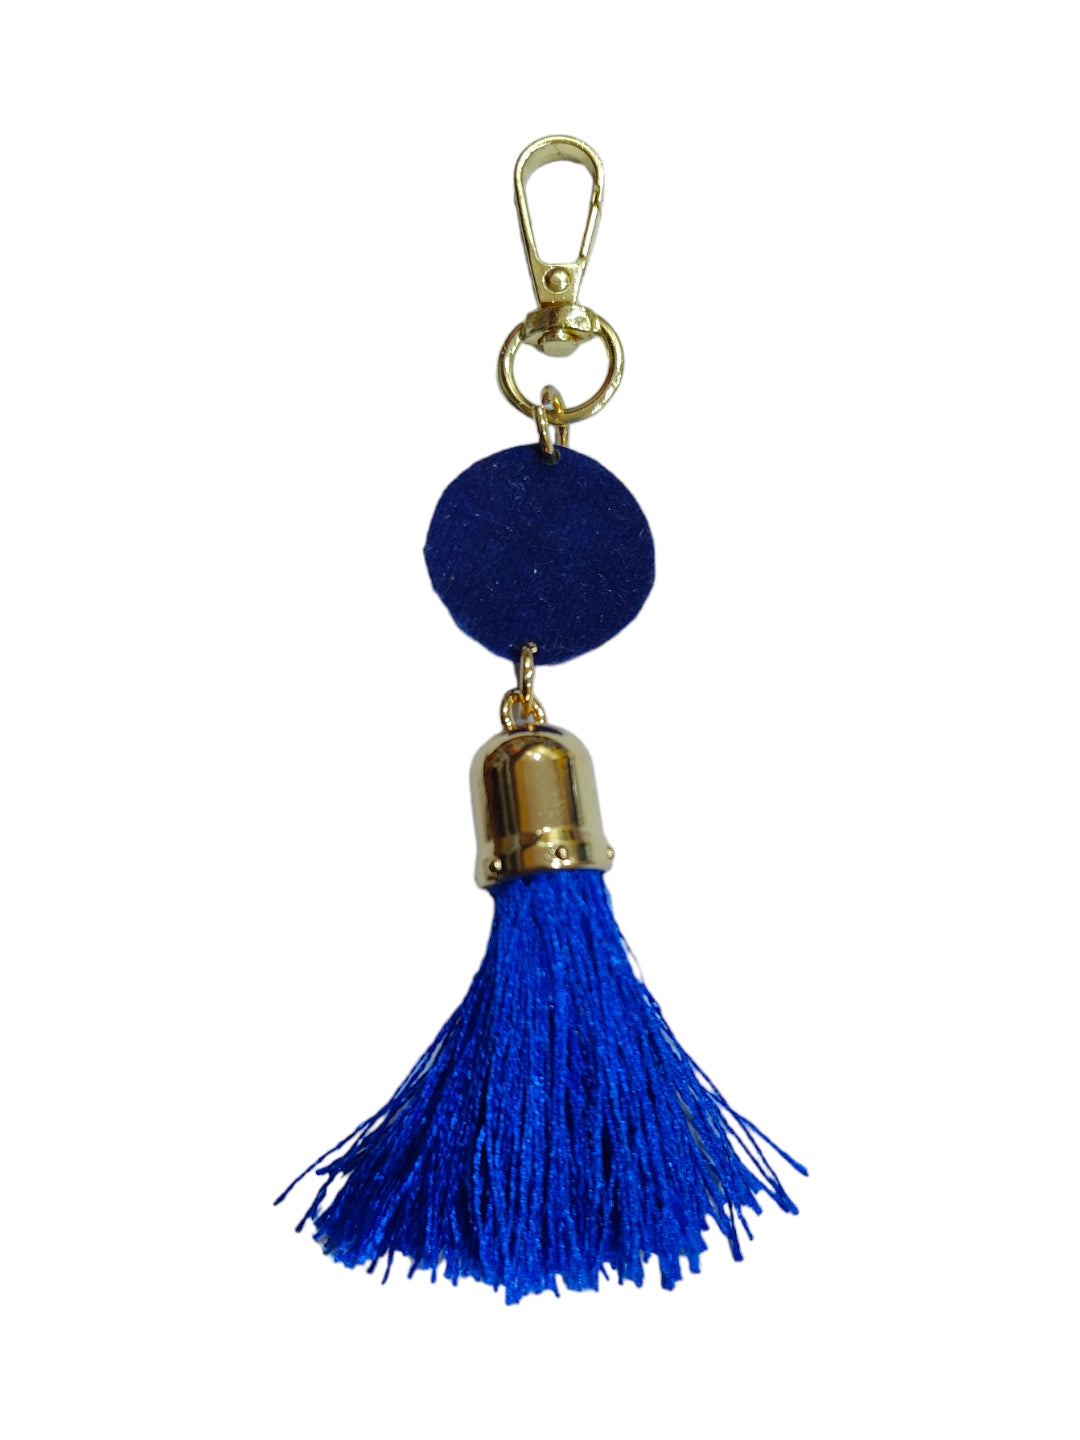  It adds a playful yet elegant accent to handbags, backpacks, or keys.